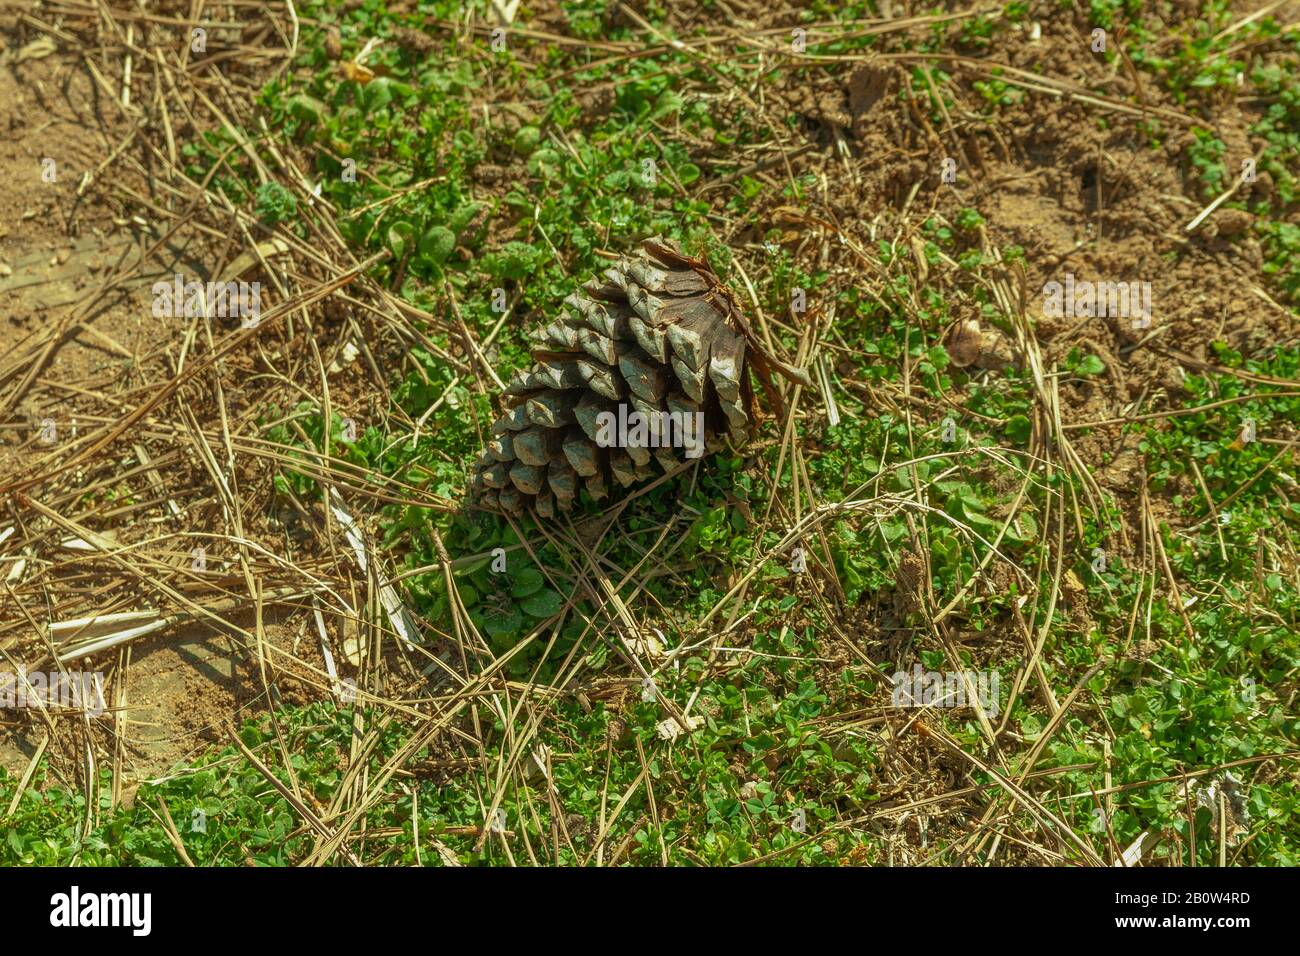 A Pinecone In The Yard With Pine Needles Ditand Weeds Surrounding It Stock Photo Alamy